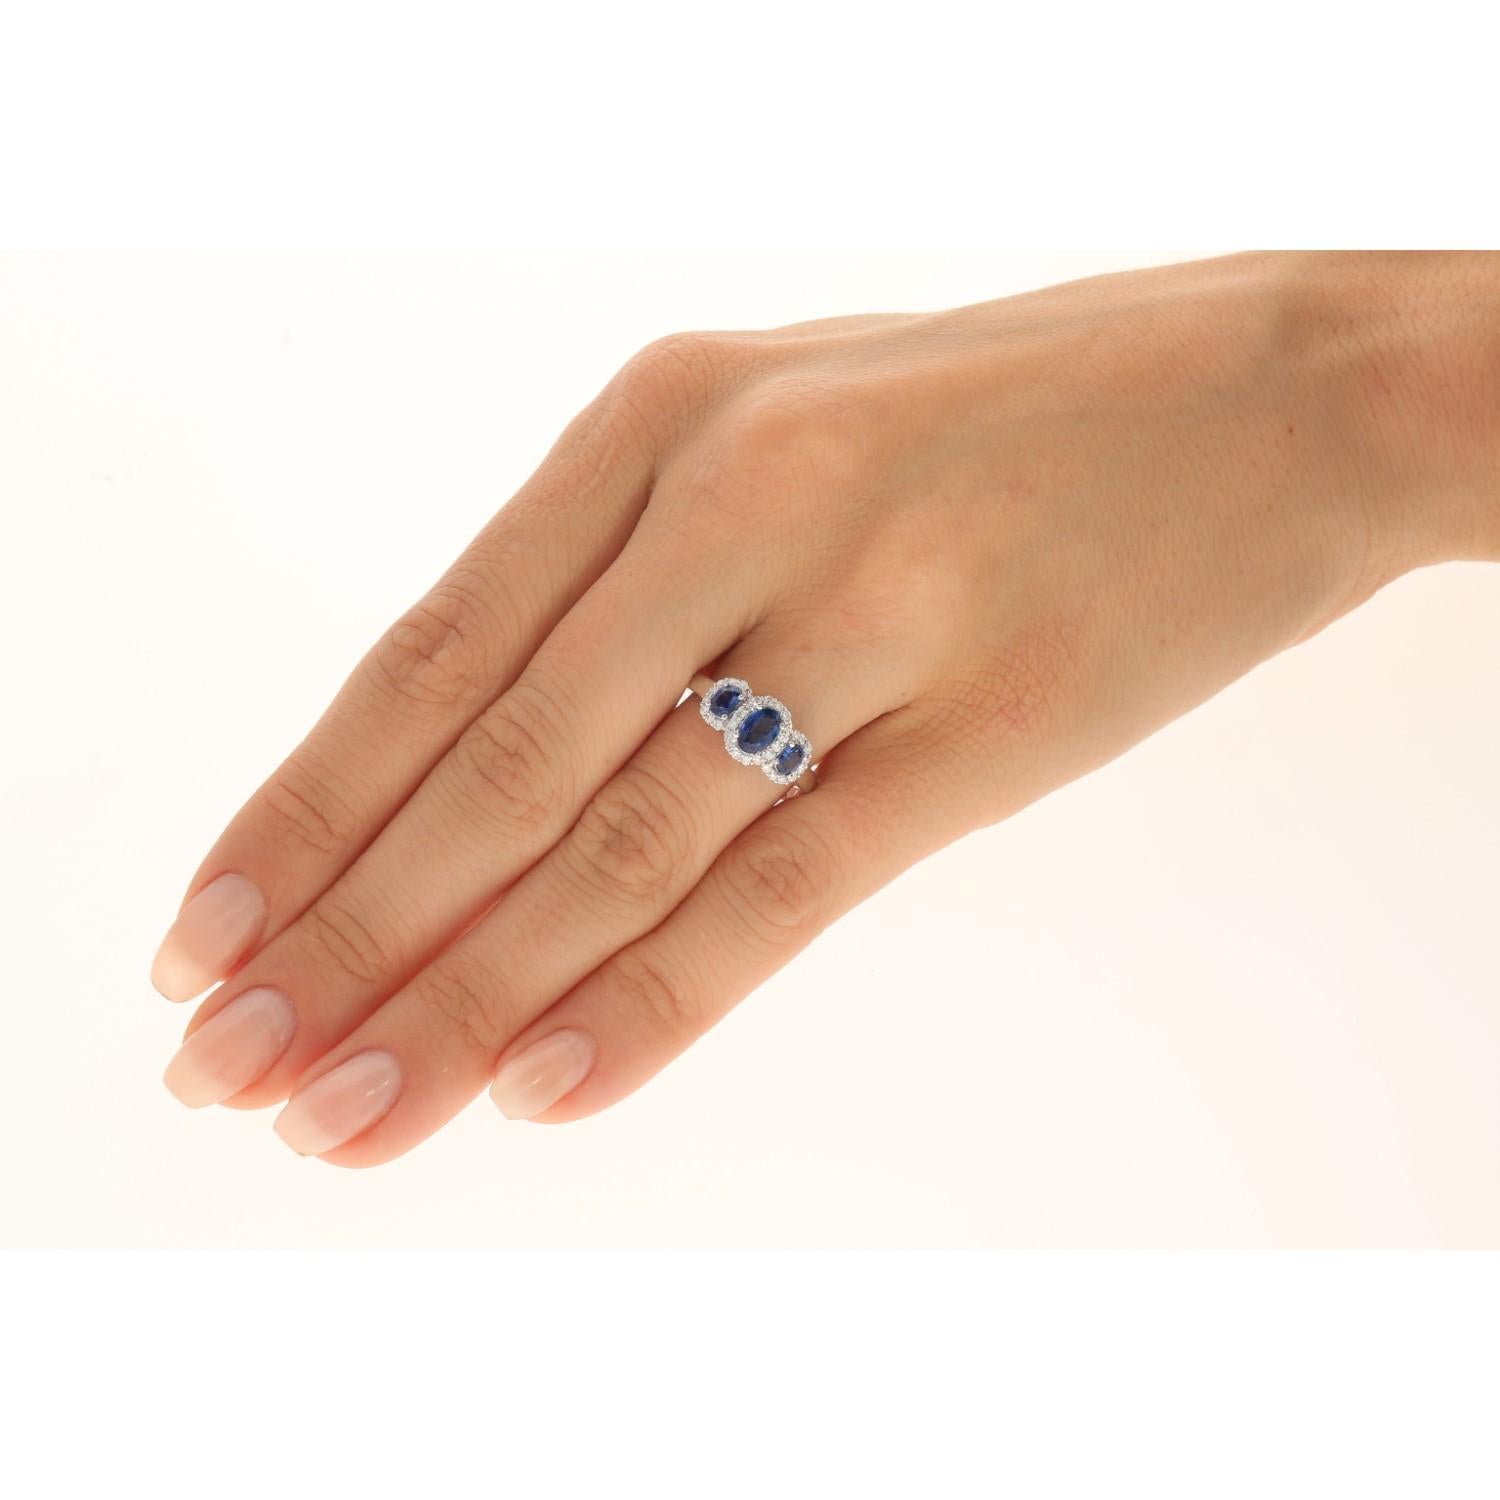 Decorate yourself in elegance with this Ring is crafted from 14-karat White Gold by Gin & Grace. This Ring is made up of 6x4 mm Oval-Cut (1 pcs) 0.60 carat, 3x4 mm Oval-cut (2 pcs) 0.54 carat Blue Sapphire and Round-cut White Diamond (32 Pcs) 0.26